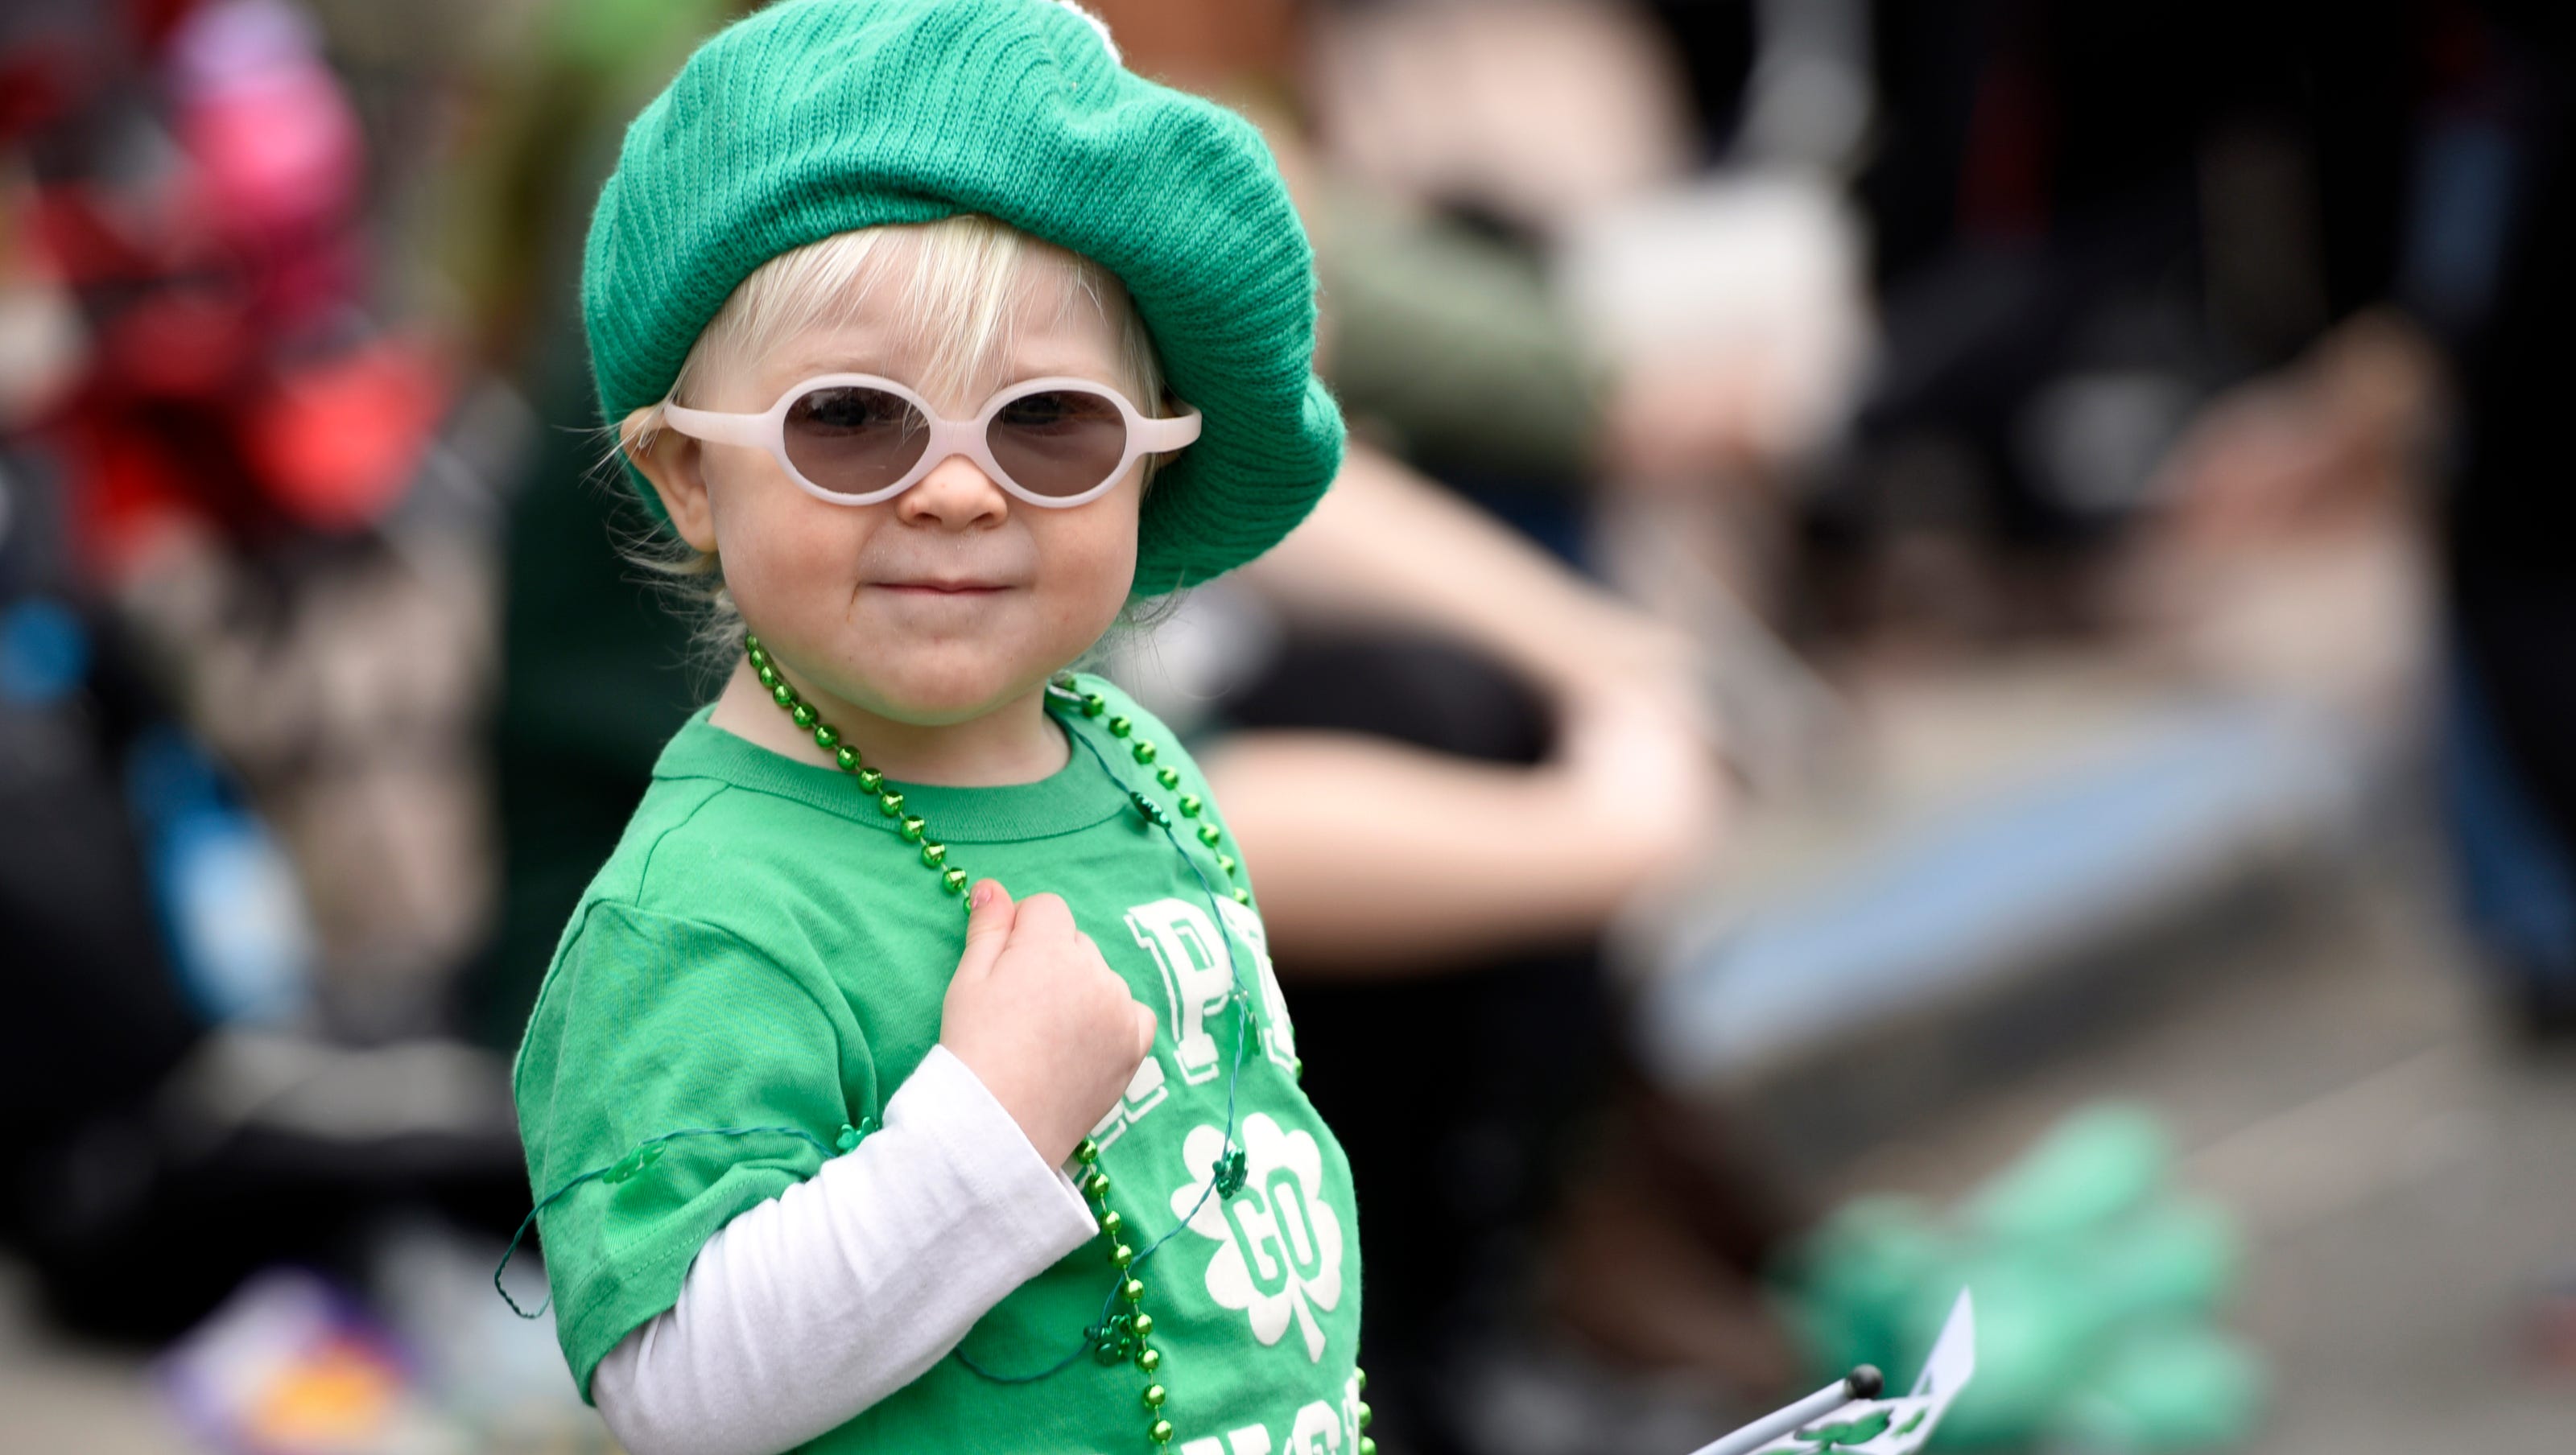 7 St Patricks Day Traditions Explained